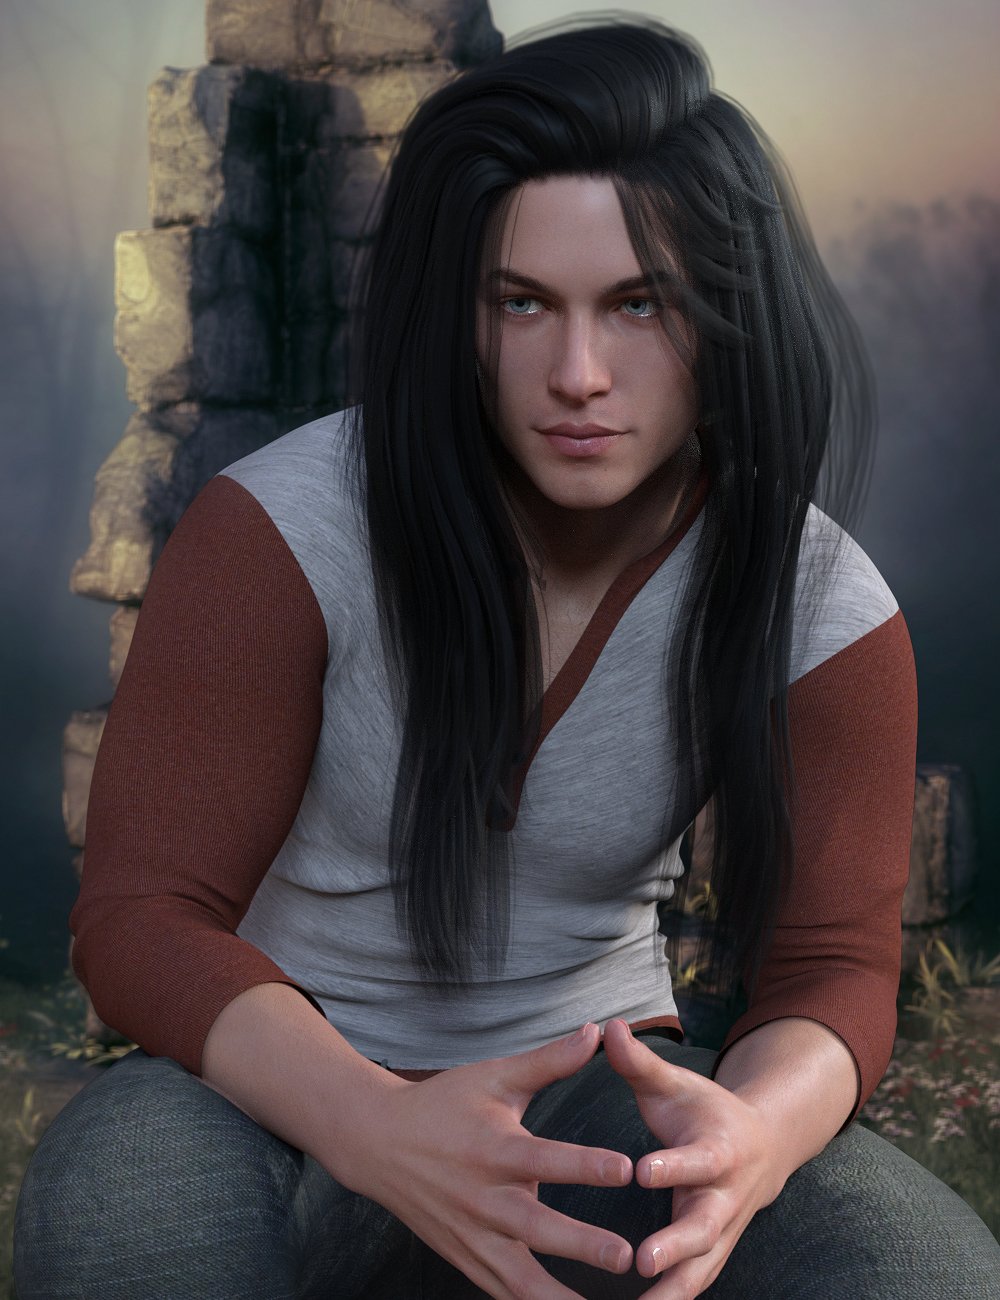 Archippos Hair Genesis 8 Male(s) by: Propschick, 3D Models by Daz 3D